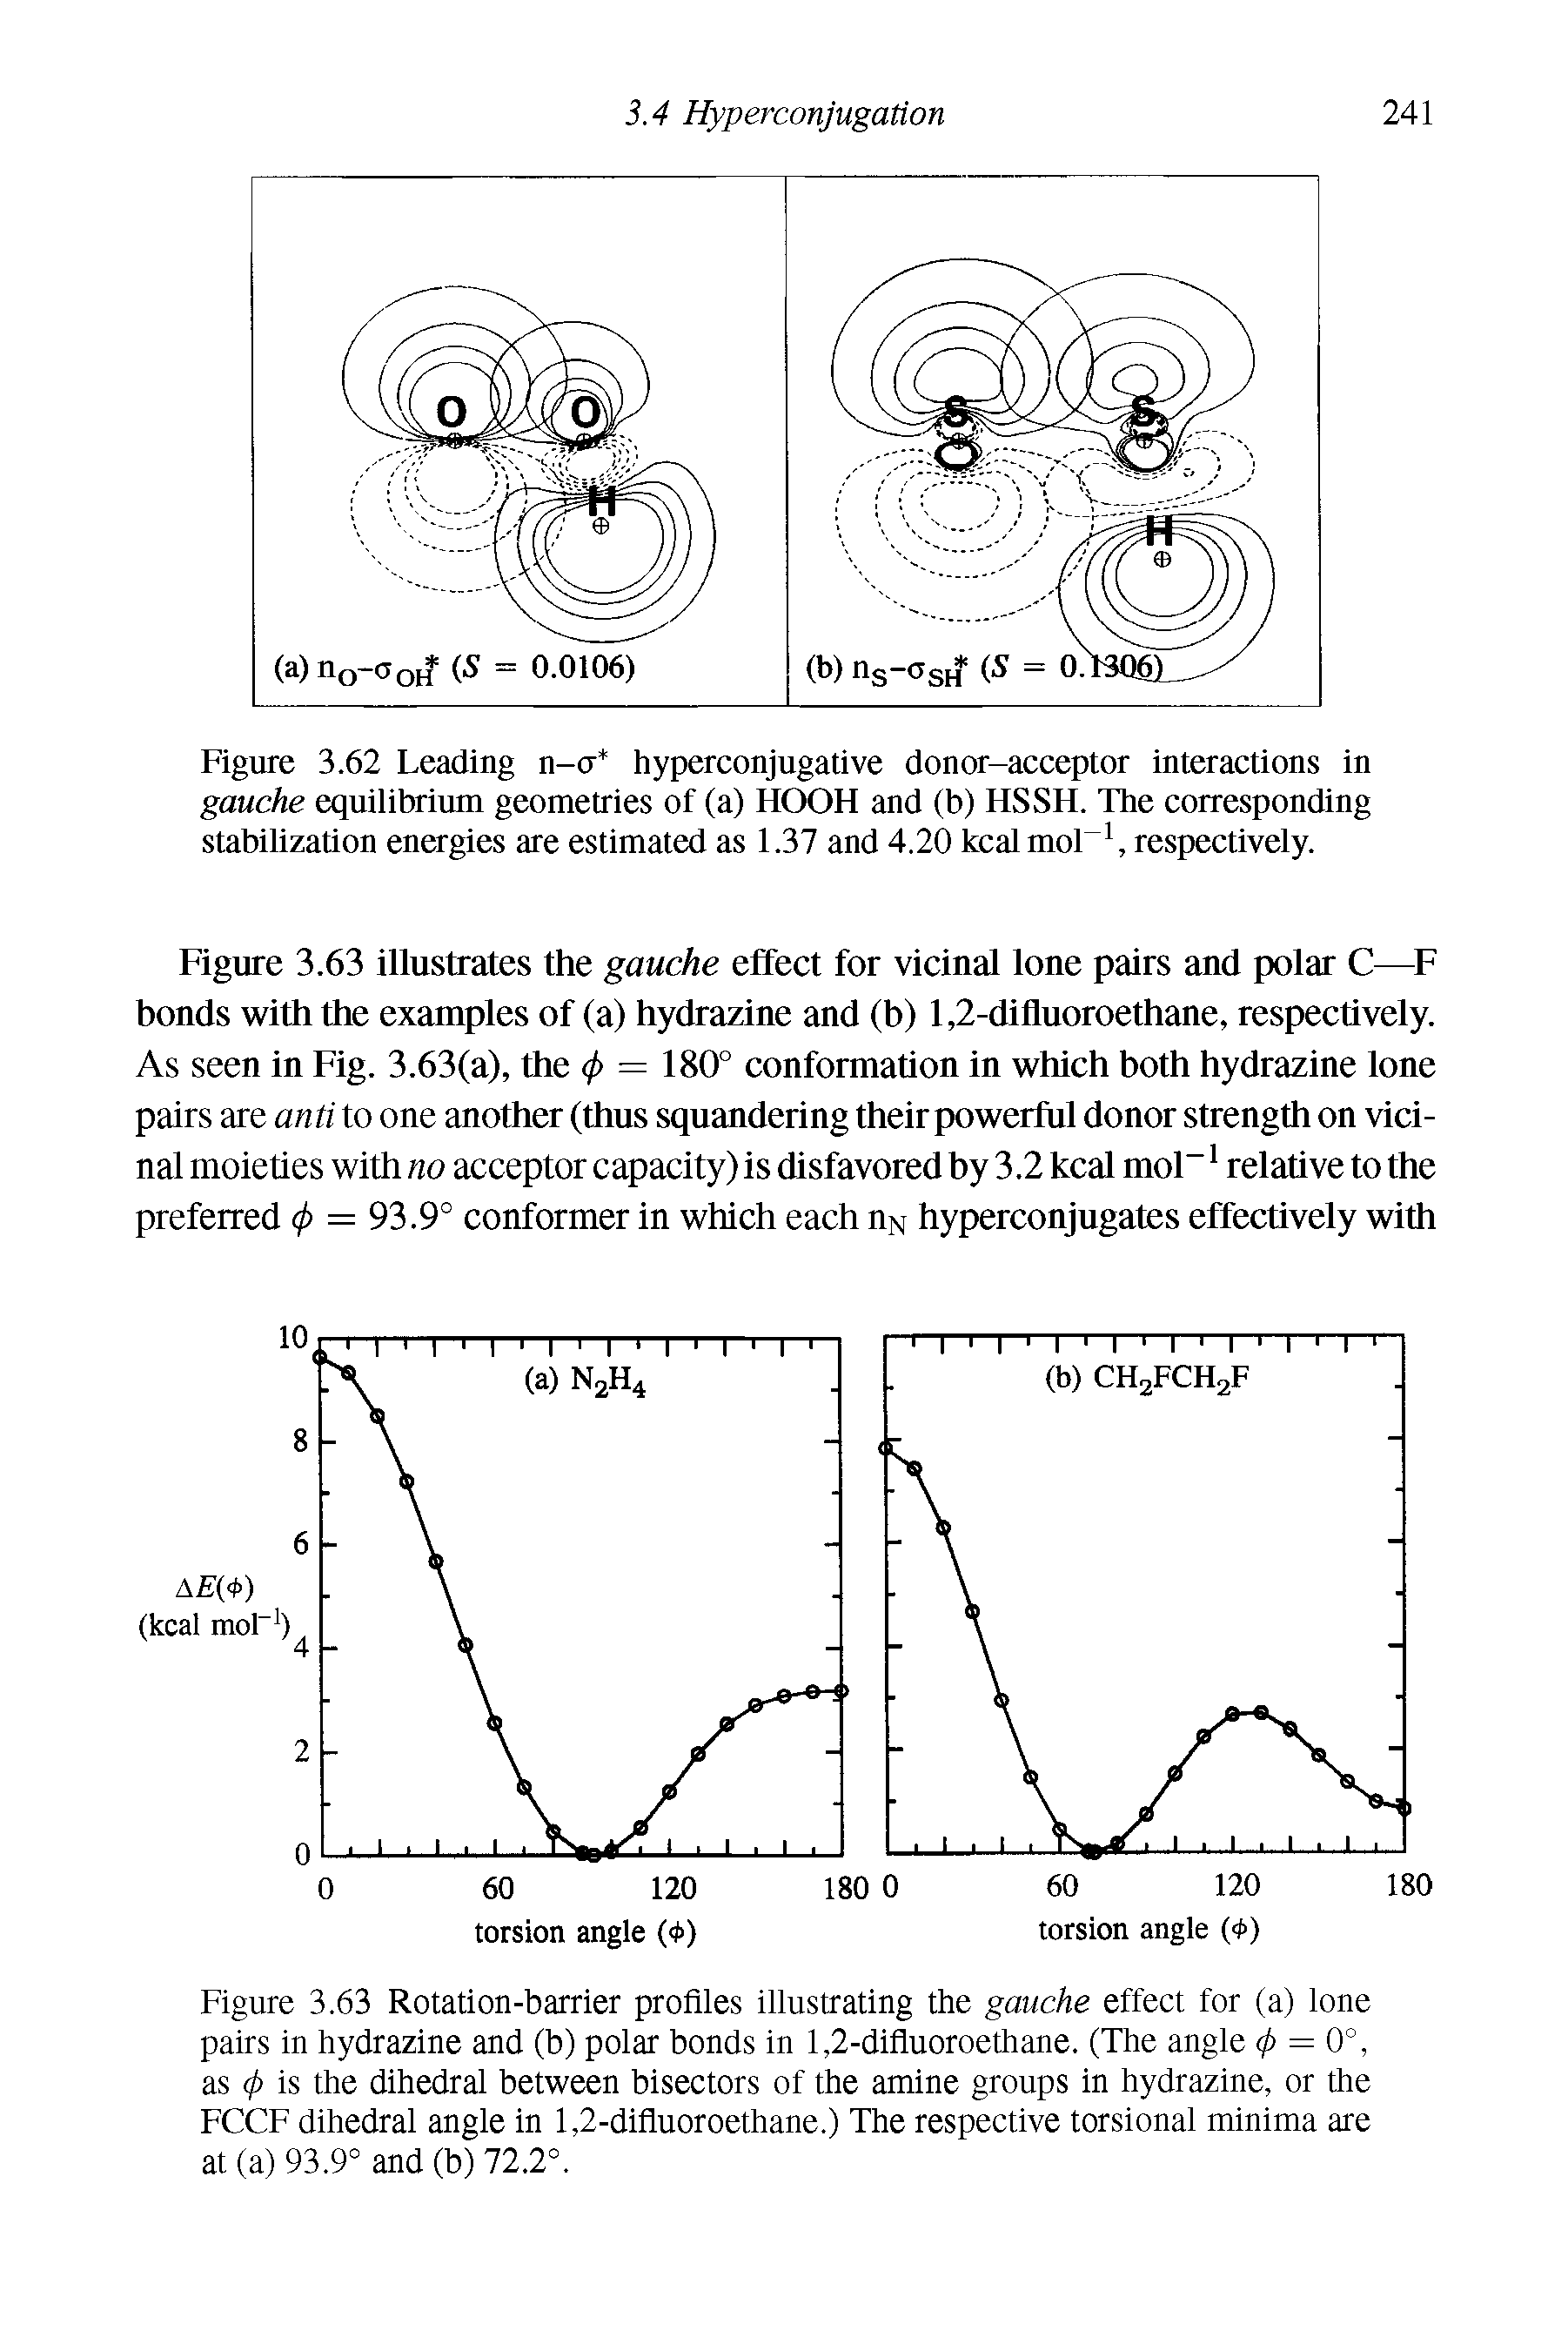 Figure 3.63 Rotation-barrier profiles illustrating the gauche effect for (a) lone pairs in hydrazine and (b) polar bonds in 1,2-difluoroethane. (The angle 4> = 0°, as <p is the dihedral between bisectors of the amine groups in hydrazine, or the FCCF dihedral angle in 1,2-difluoroethane.) The respective torsional minima are at (a) 93.9° and (b) 72.2°.